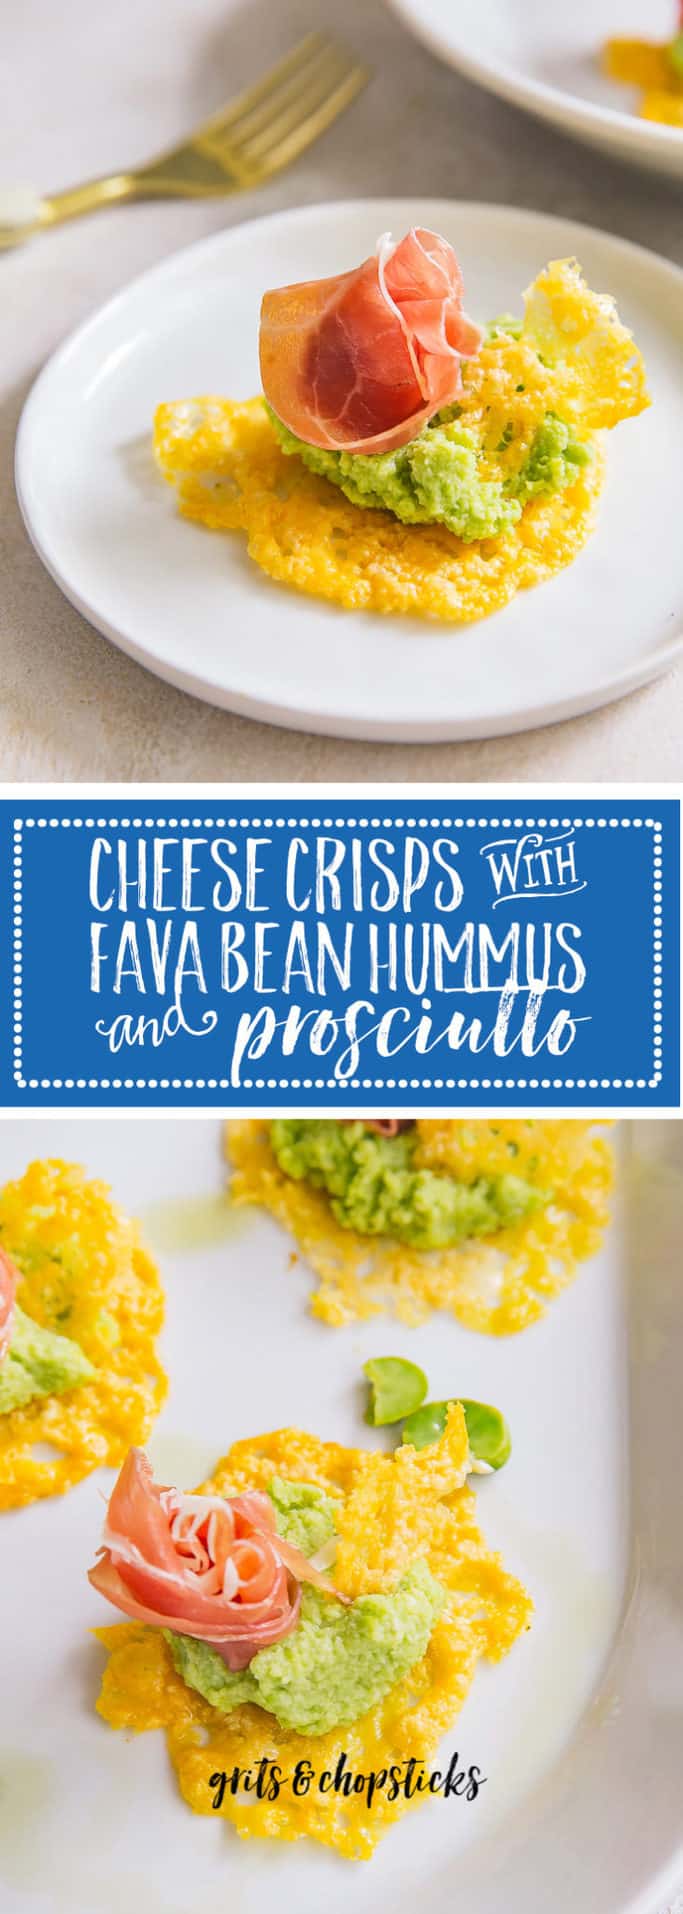 These cheese crisps with fava bean hummus and prosciutto are perfect for your next dinner party!